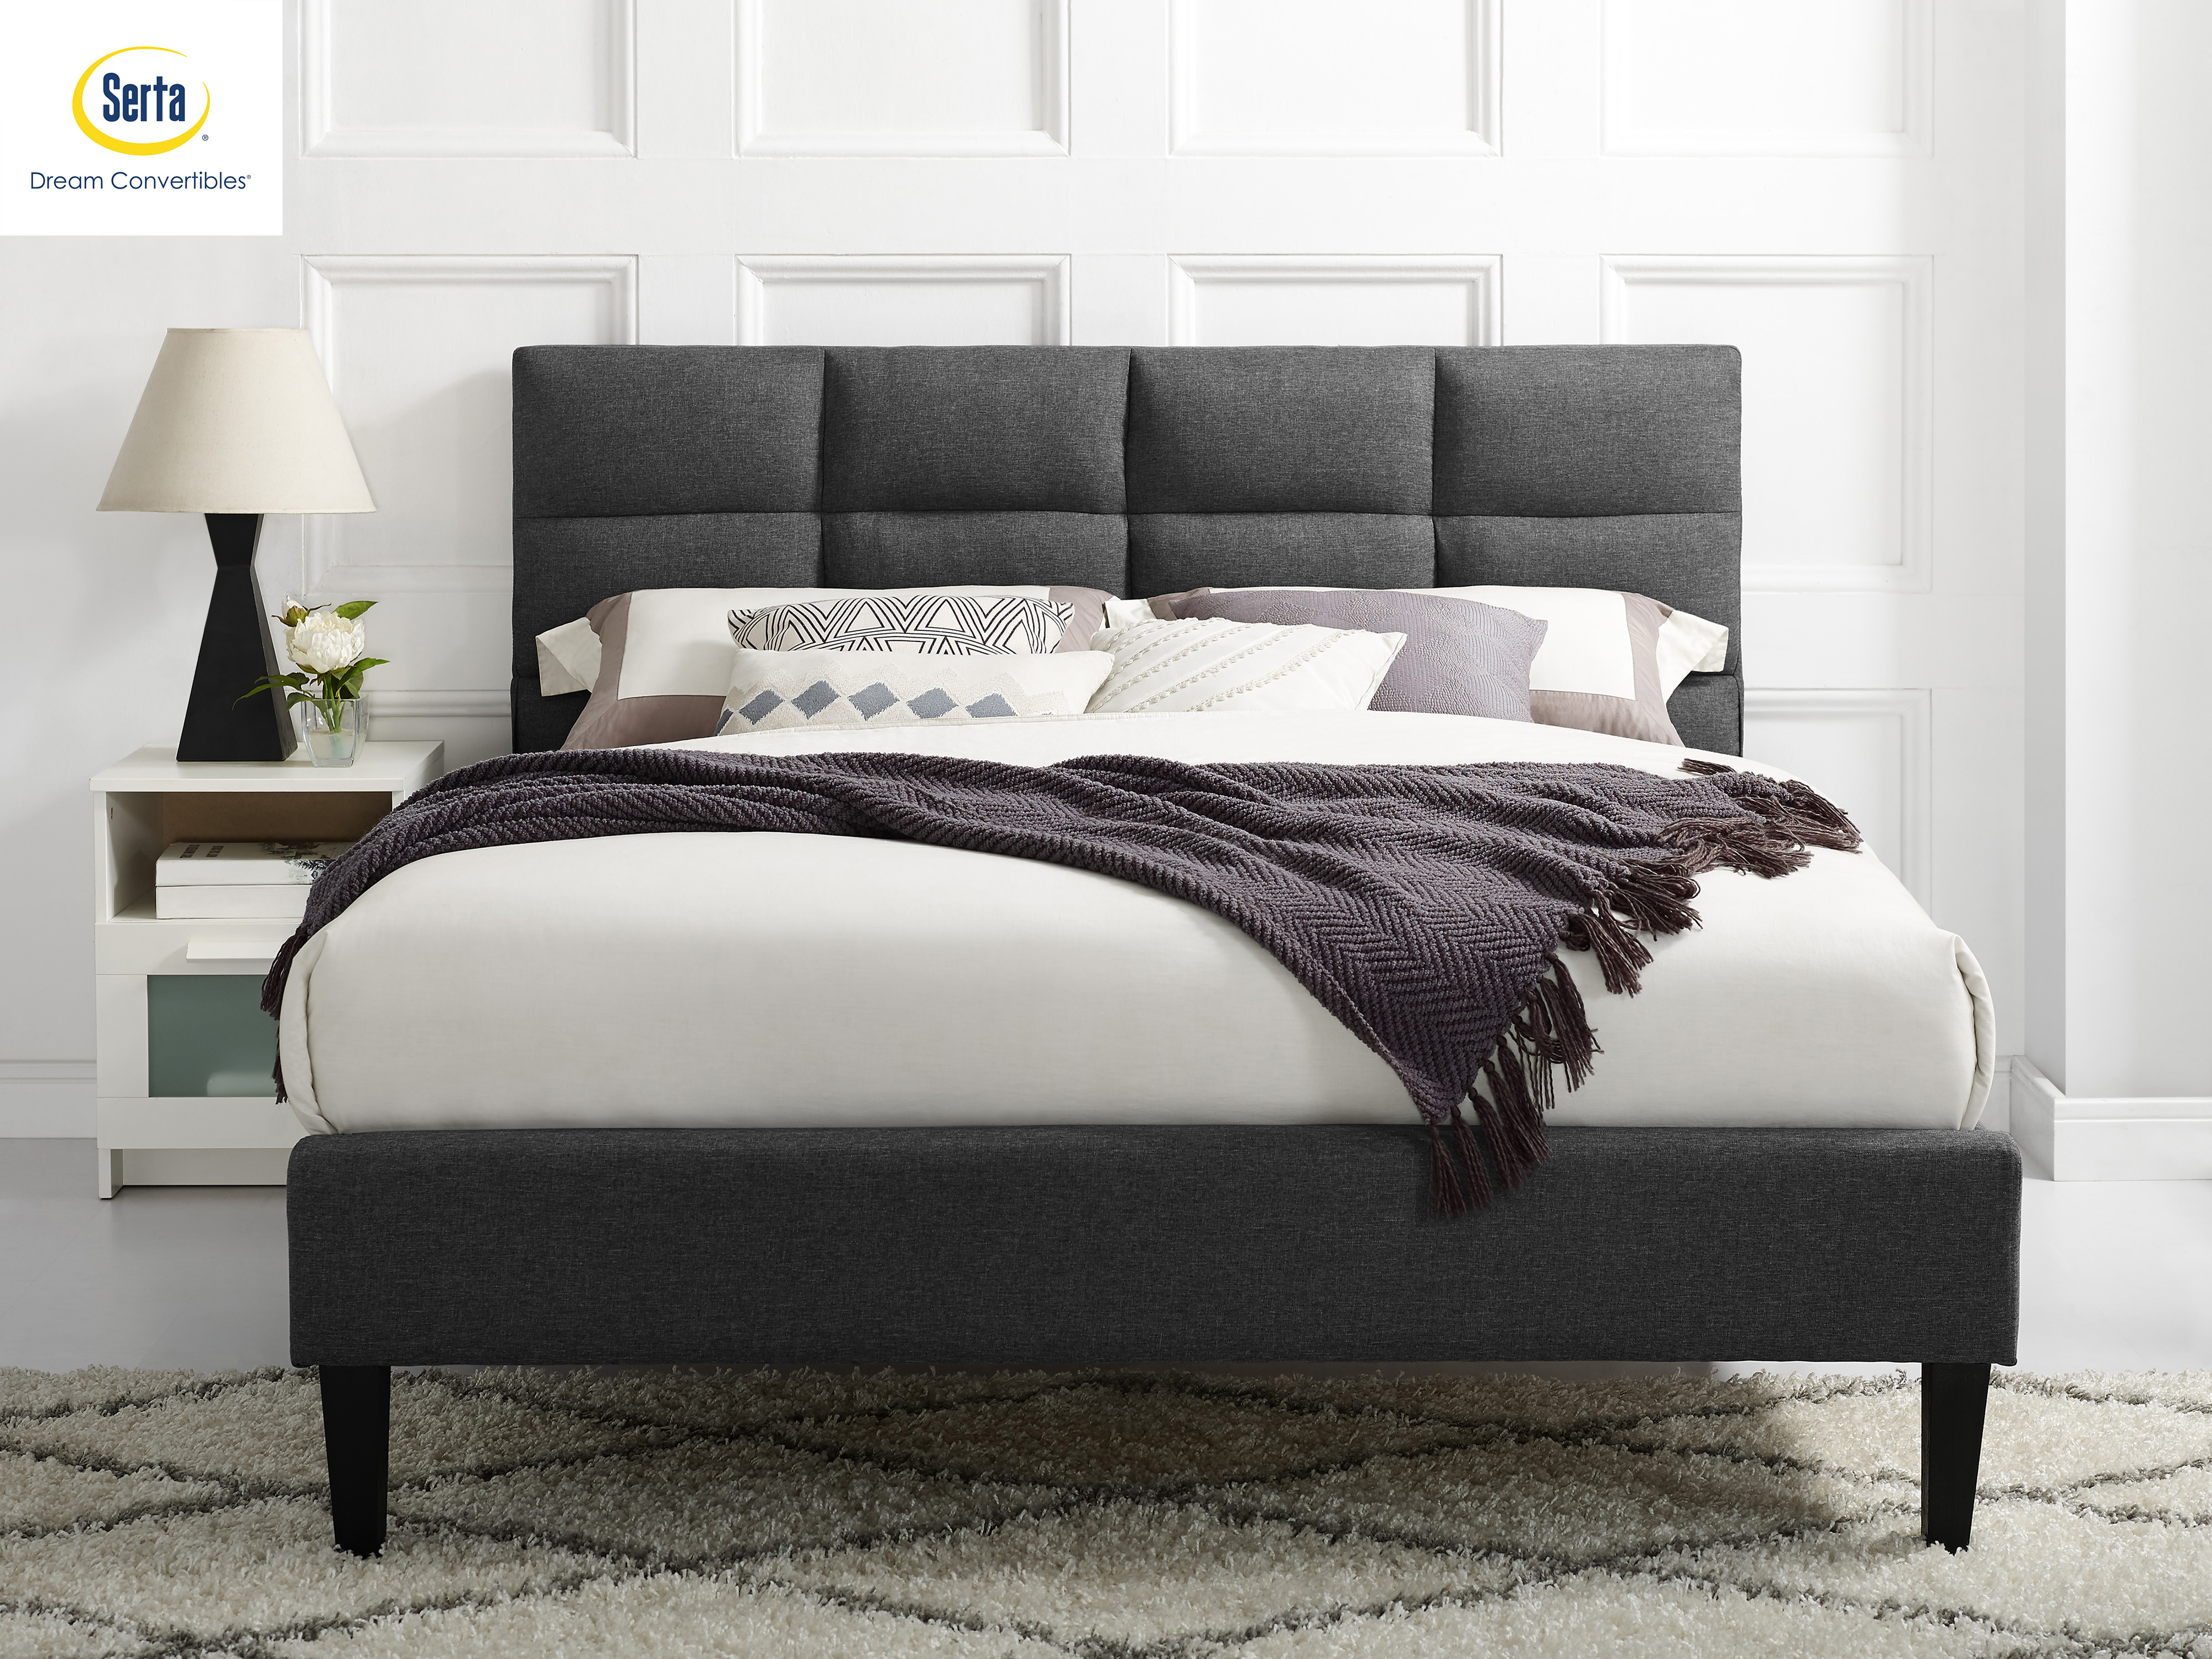 Lifestyle Solutions Serta Zola Upholstered Head & Footboard with Euro Slats in Queen, Dark Grey - image 1 of 9